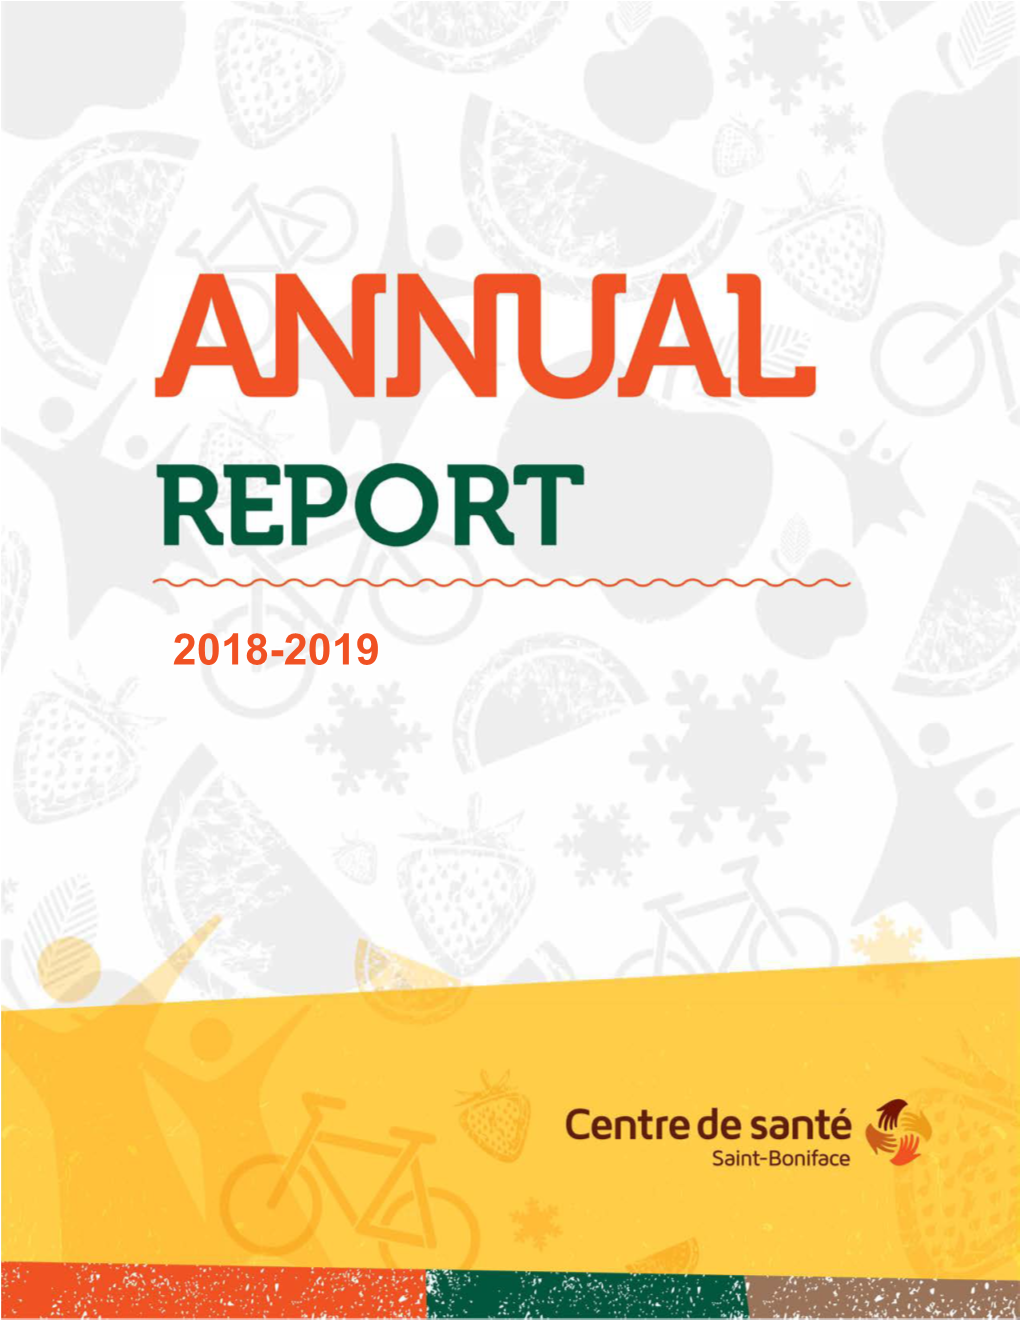 Download the 2018-2019 Annual Report